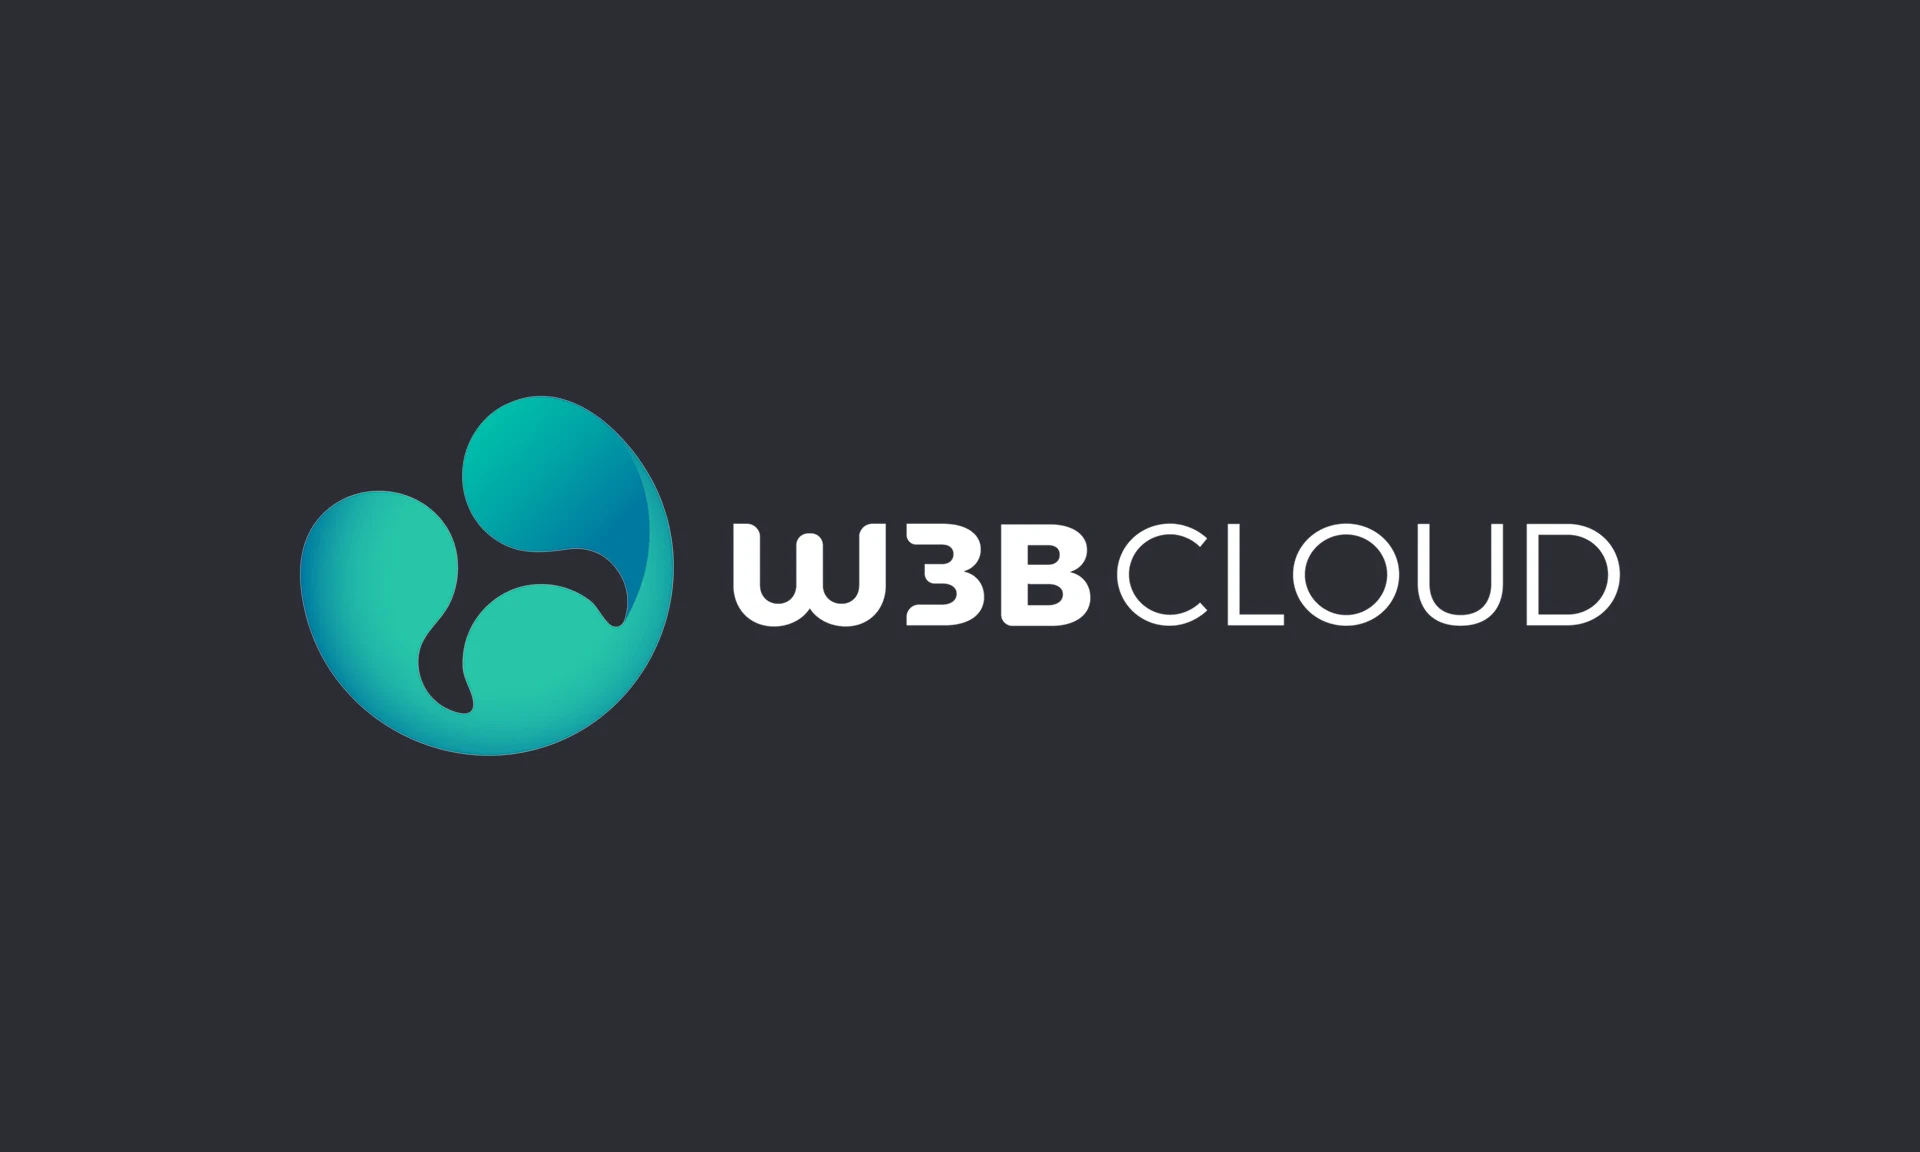 Image: ConsenSys-Backed W3BCLOUD Raises $20.5M to Rollout Data Centers for Blockchain